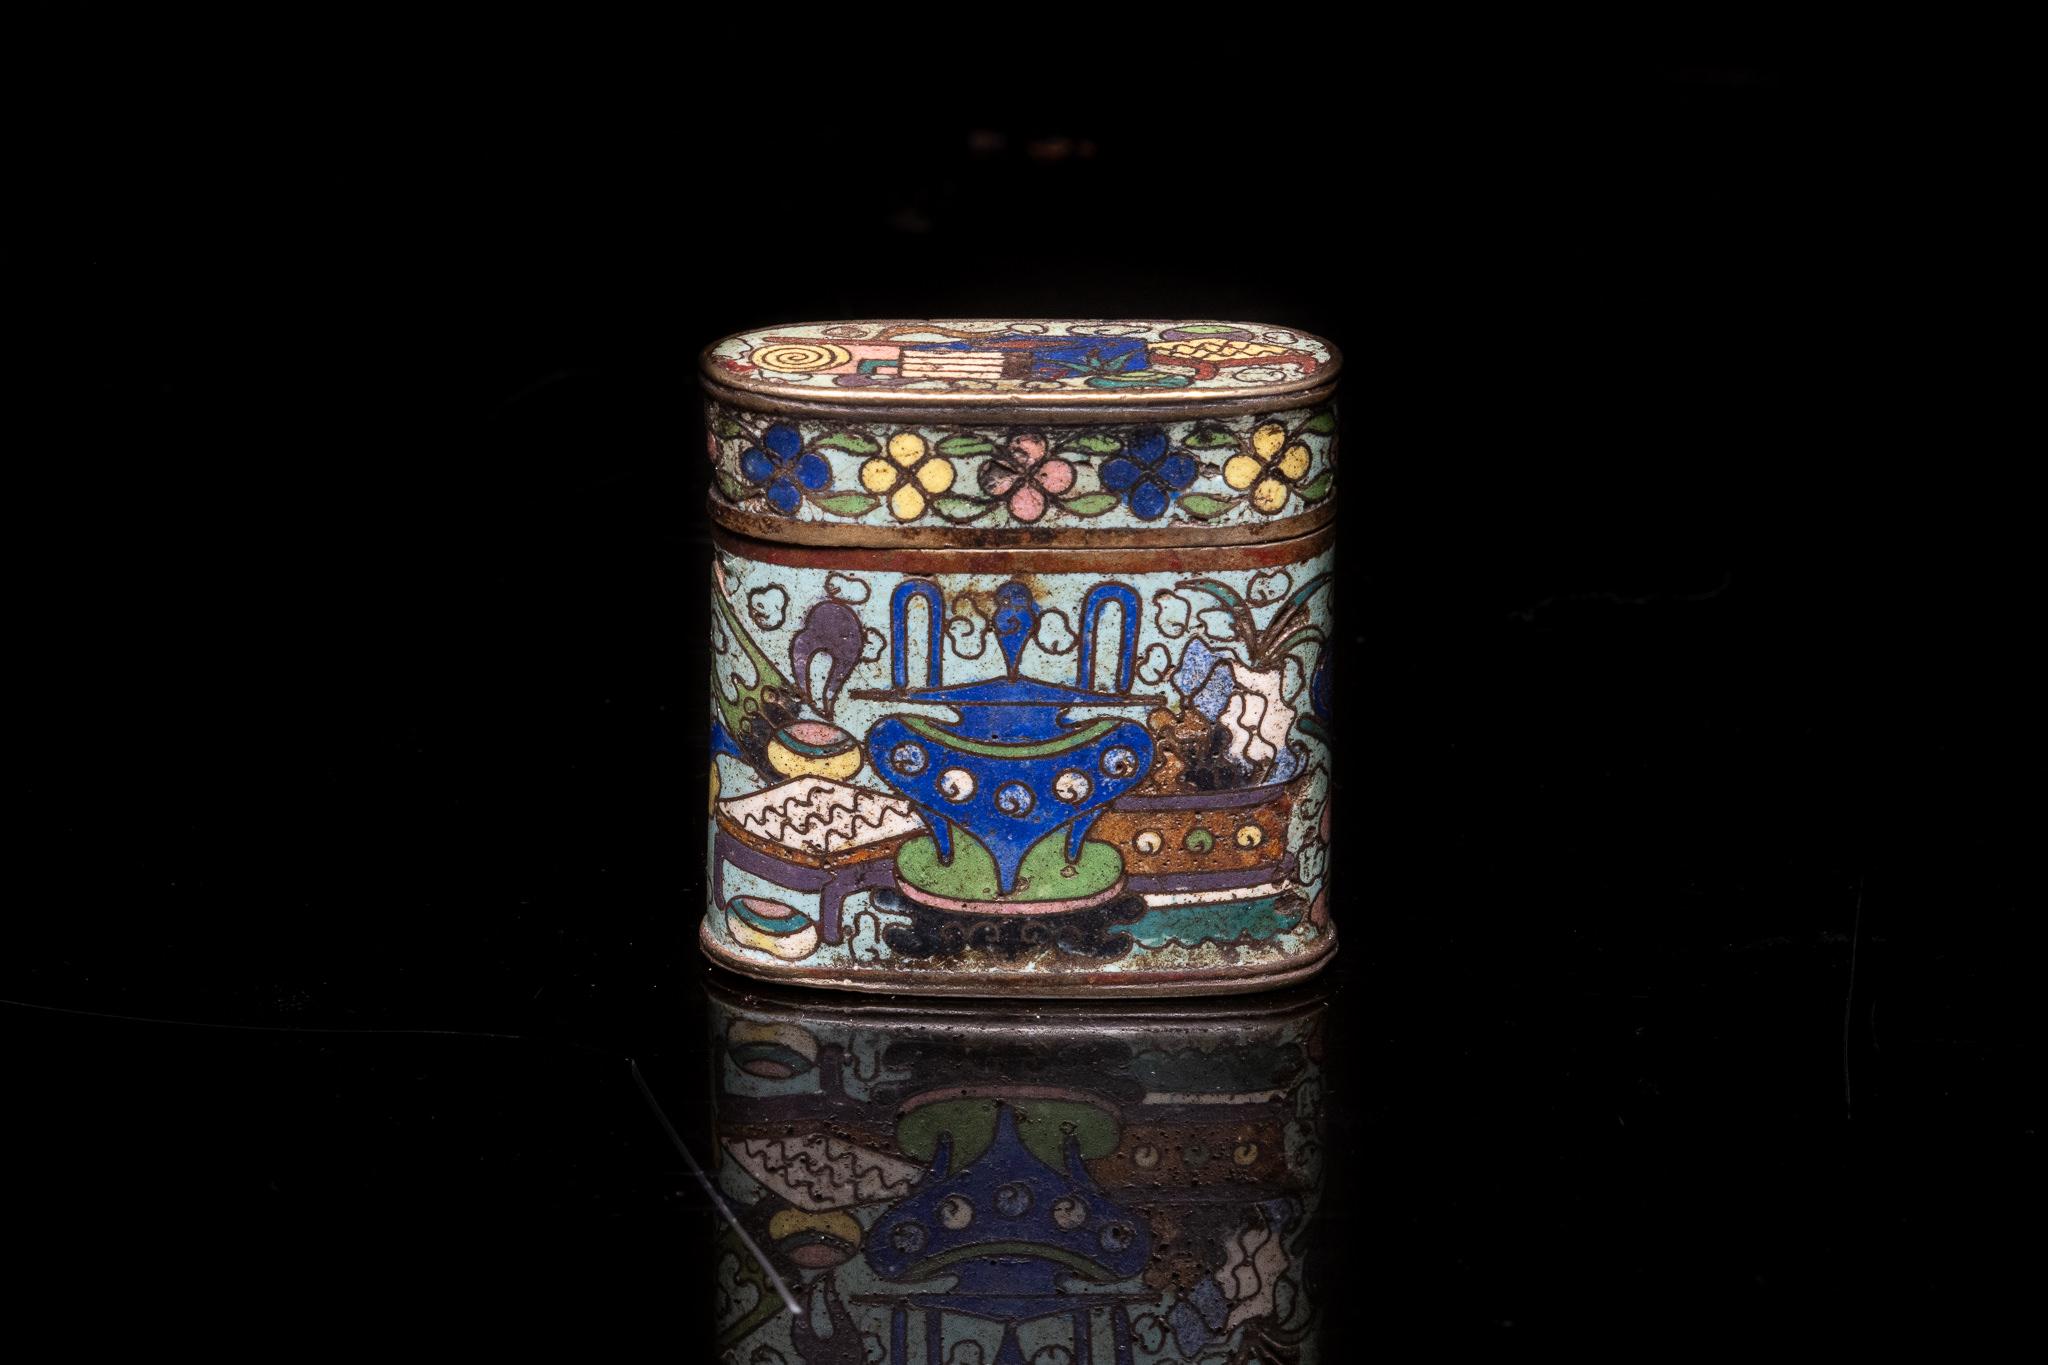 19th Century Antique Asian Chinese Opium Box in Cloisonné Enamel, Snuff Box Floral Motif For Sale